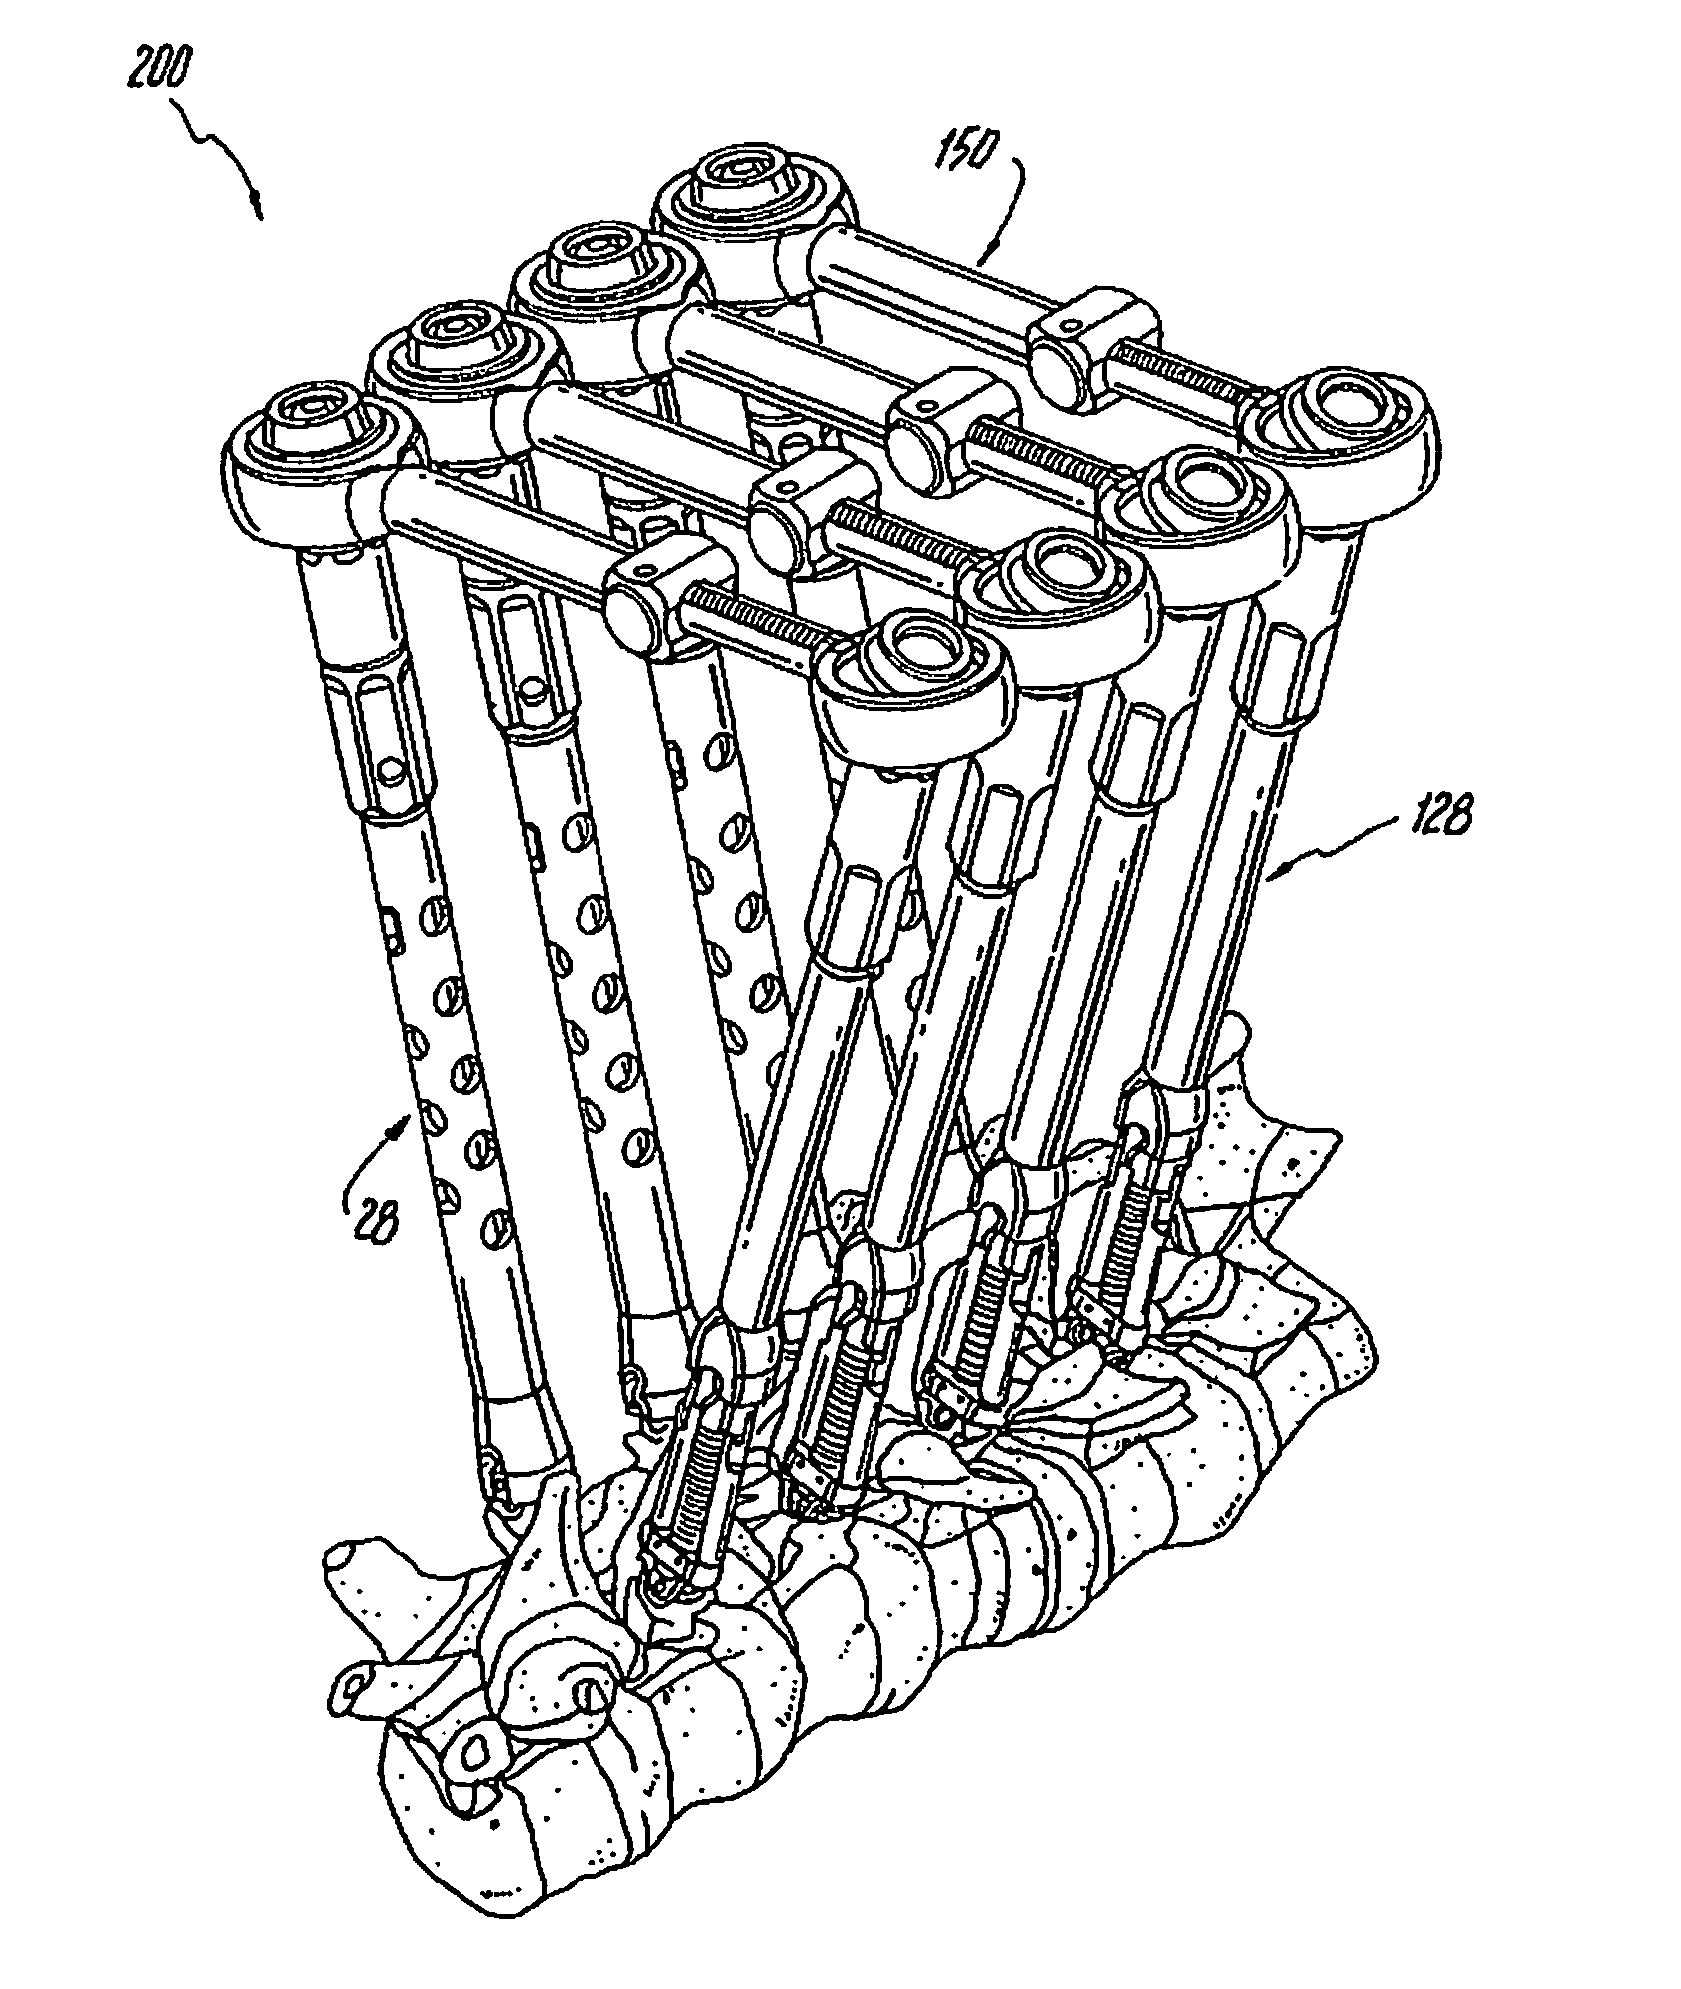 System and method for performing spinal surgery